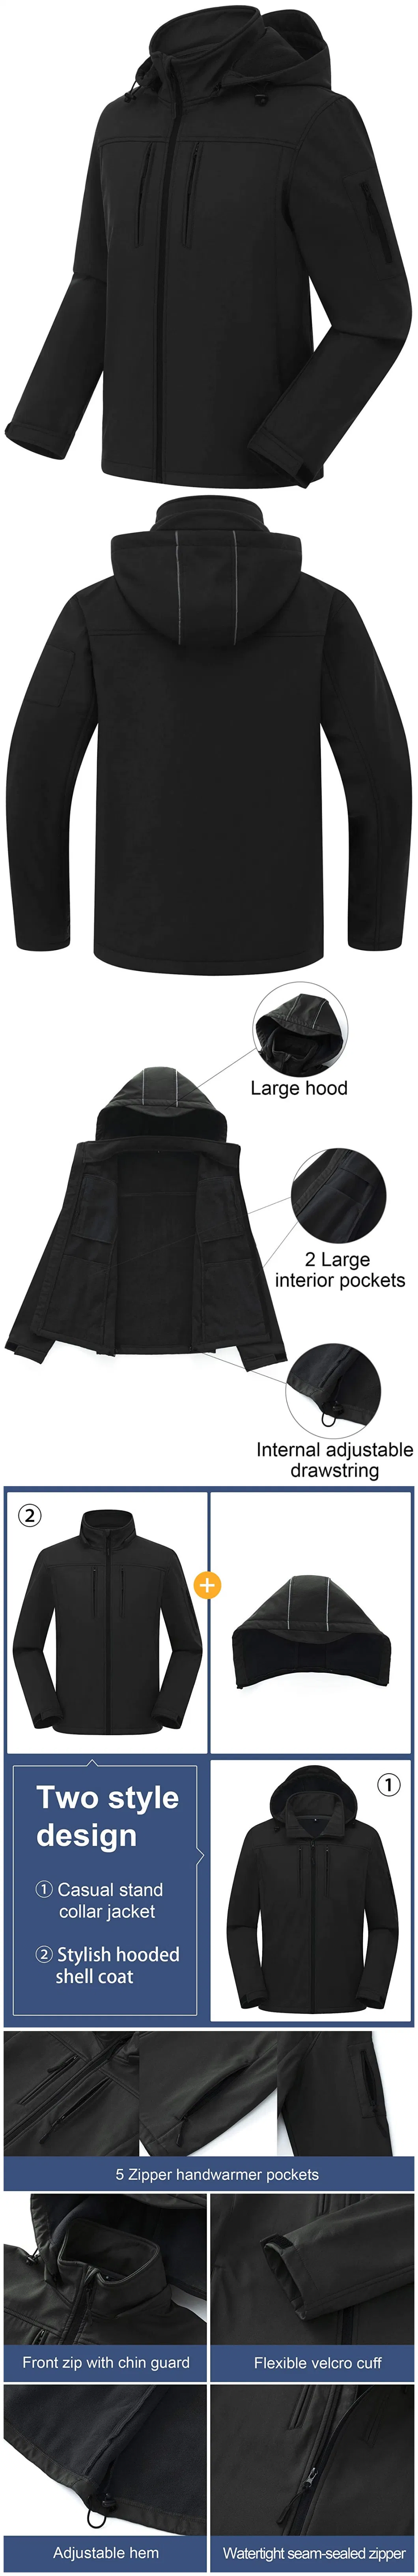 Men Softshell Military style Winter Sport Waterproof Windproof Fashion Outdoor Jacket with Removable Hood